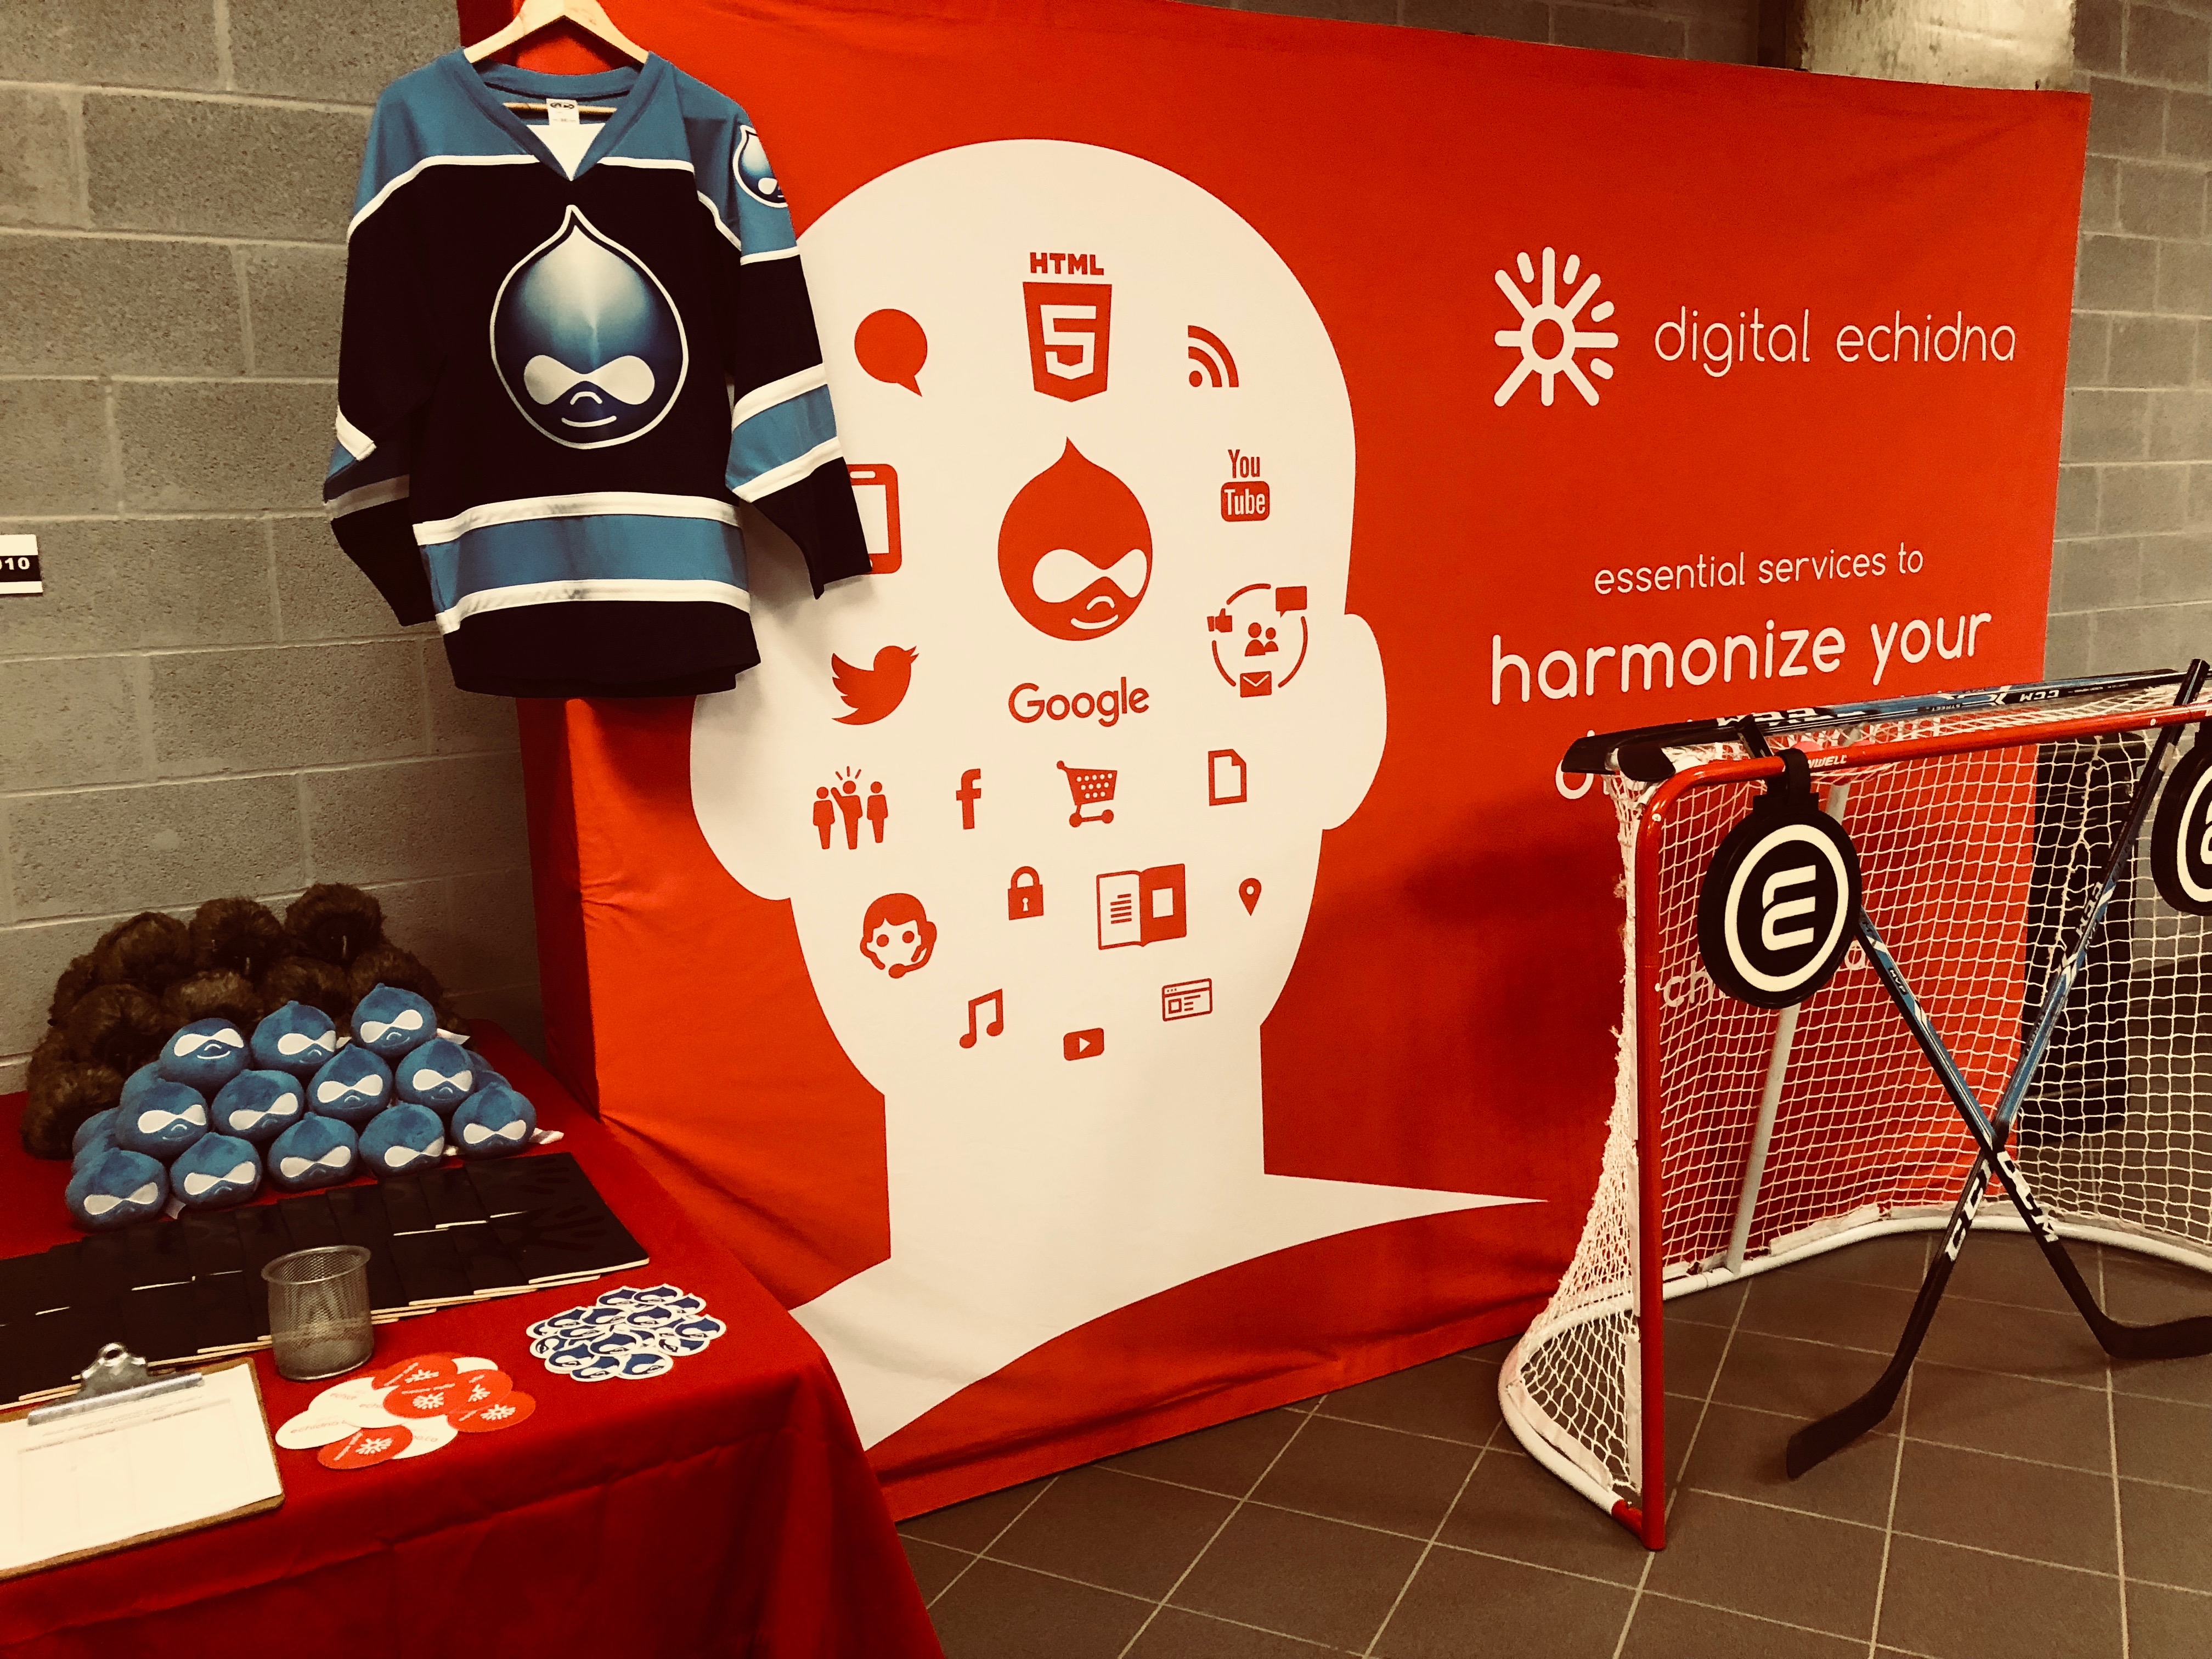 The Digital Echidna trade show booth, with banner, jersey, and hockey net.